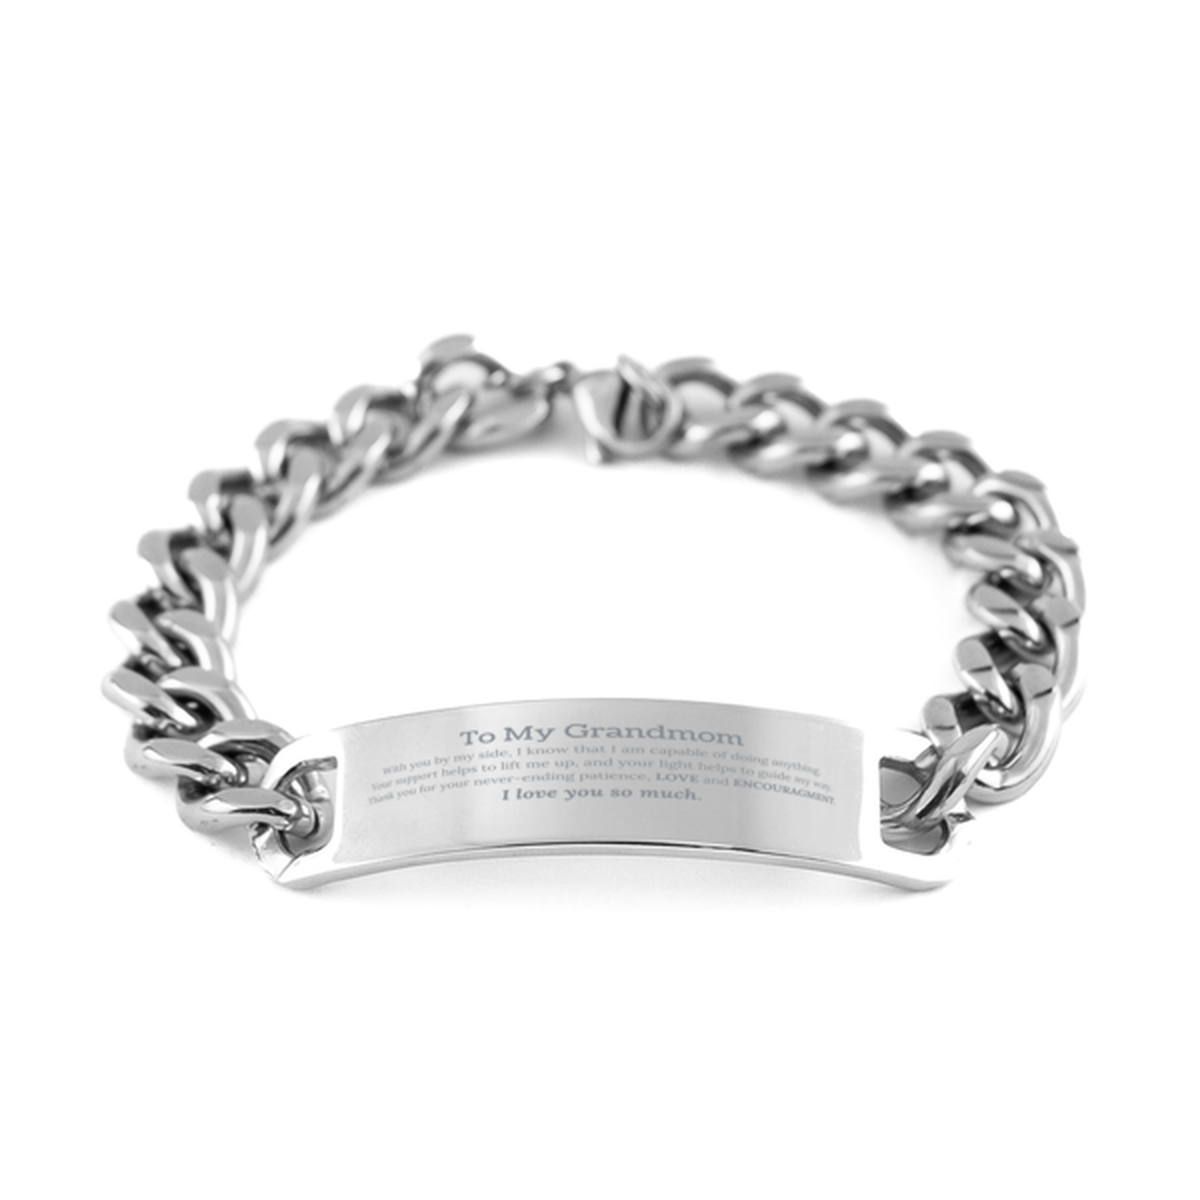 Appreciation Grandmom Cuban Chain Stainless Steel Bracelet Gifts, To My Grandmom Birthday Christmas Wedding Keepsake Gifts for Grandmom With you by my side, I know that I am capable of doing anything. I love you so much